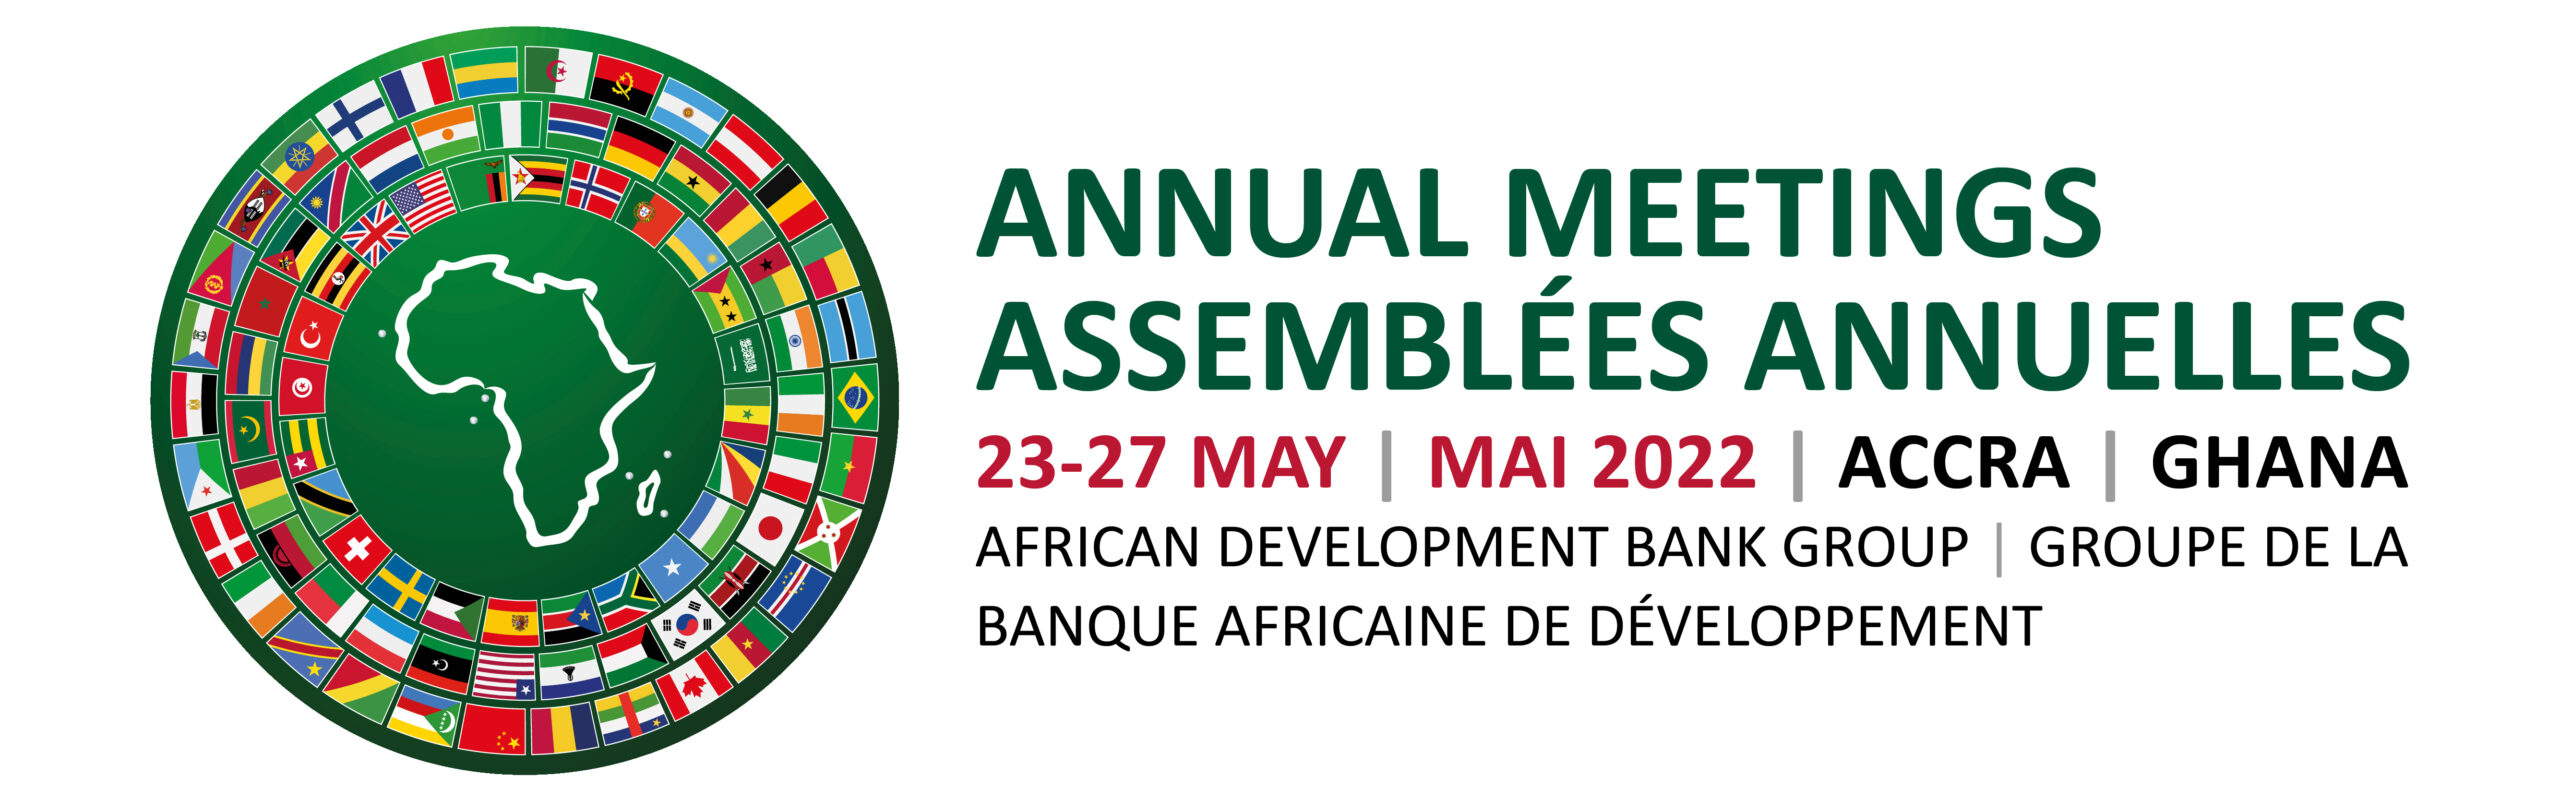 AFRICAN DEVELOPMENT BANK PRE-ANNUAL MEETINGS PRESS CONFERENCE [WEDNESDAY, 20 APRIL 2022]